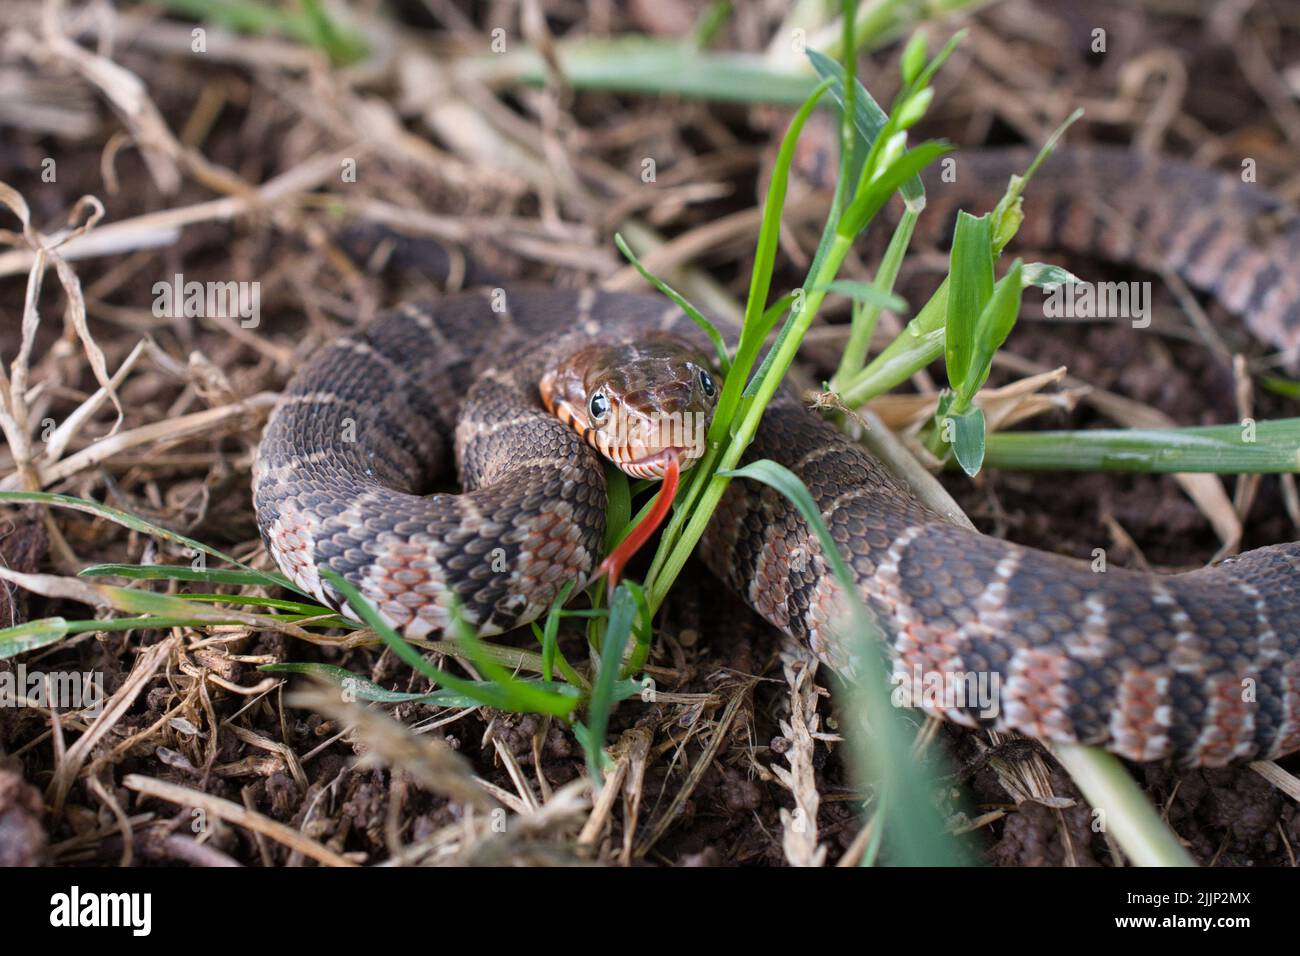 A juvenile Plain-bellied Watersnake slithering through the yard. Stock Photo